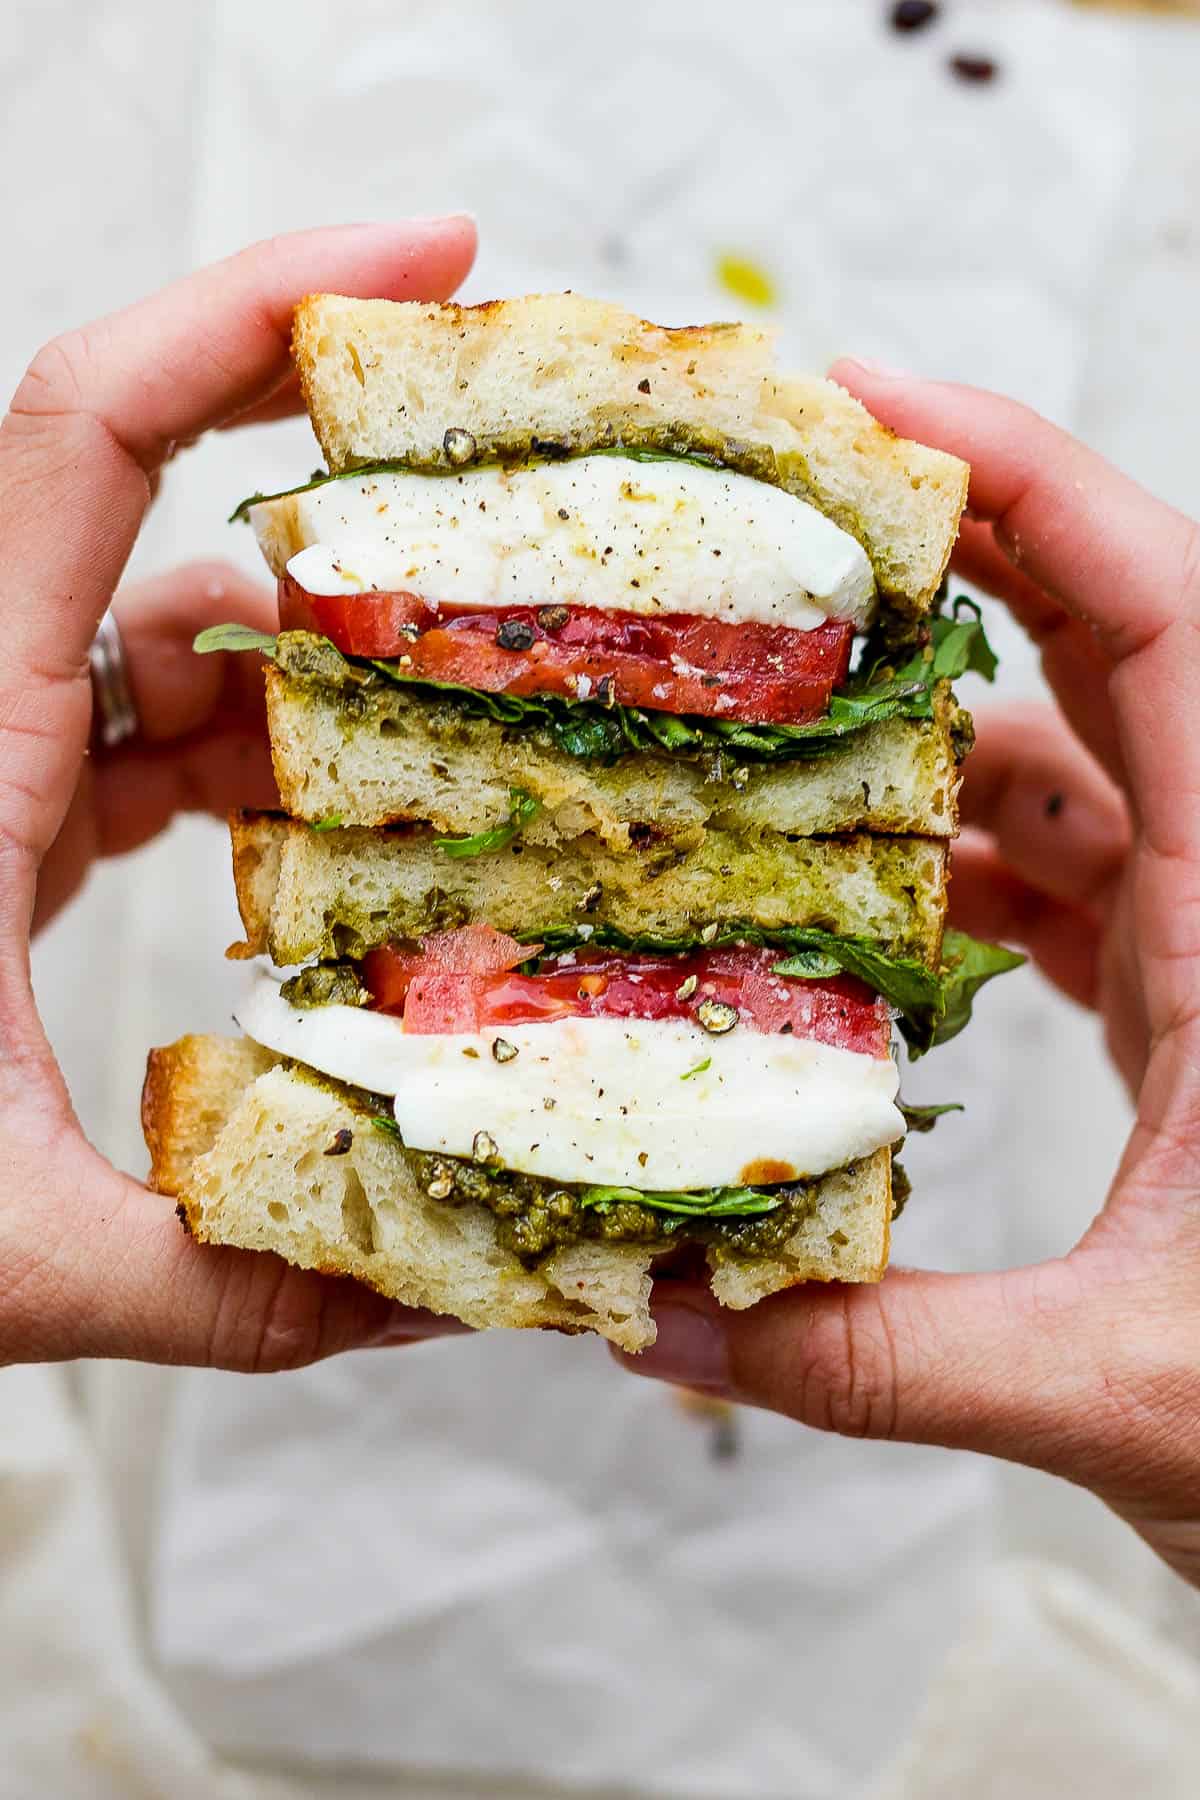 Two hands holding a caprese sandwich that has been cut in half to see the inside.